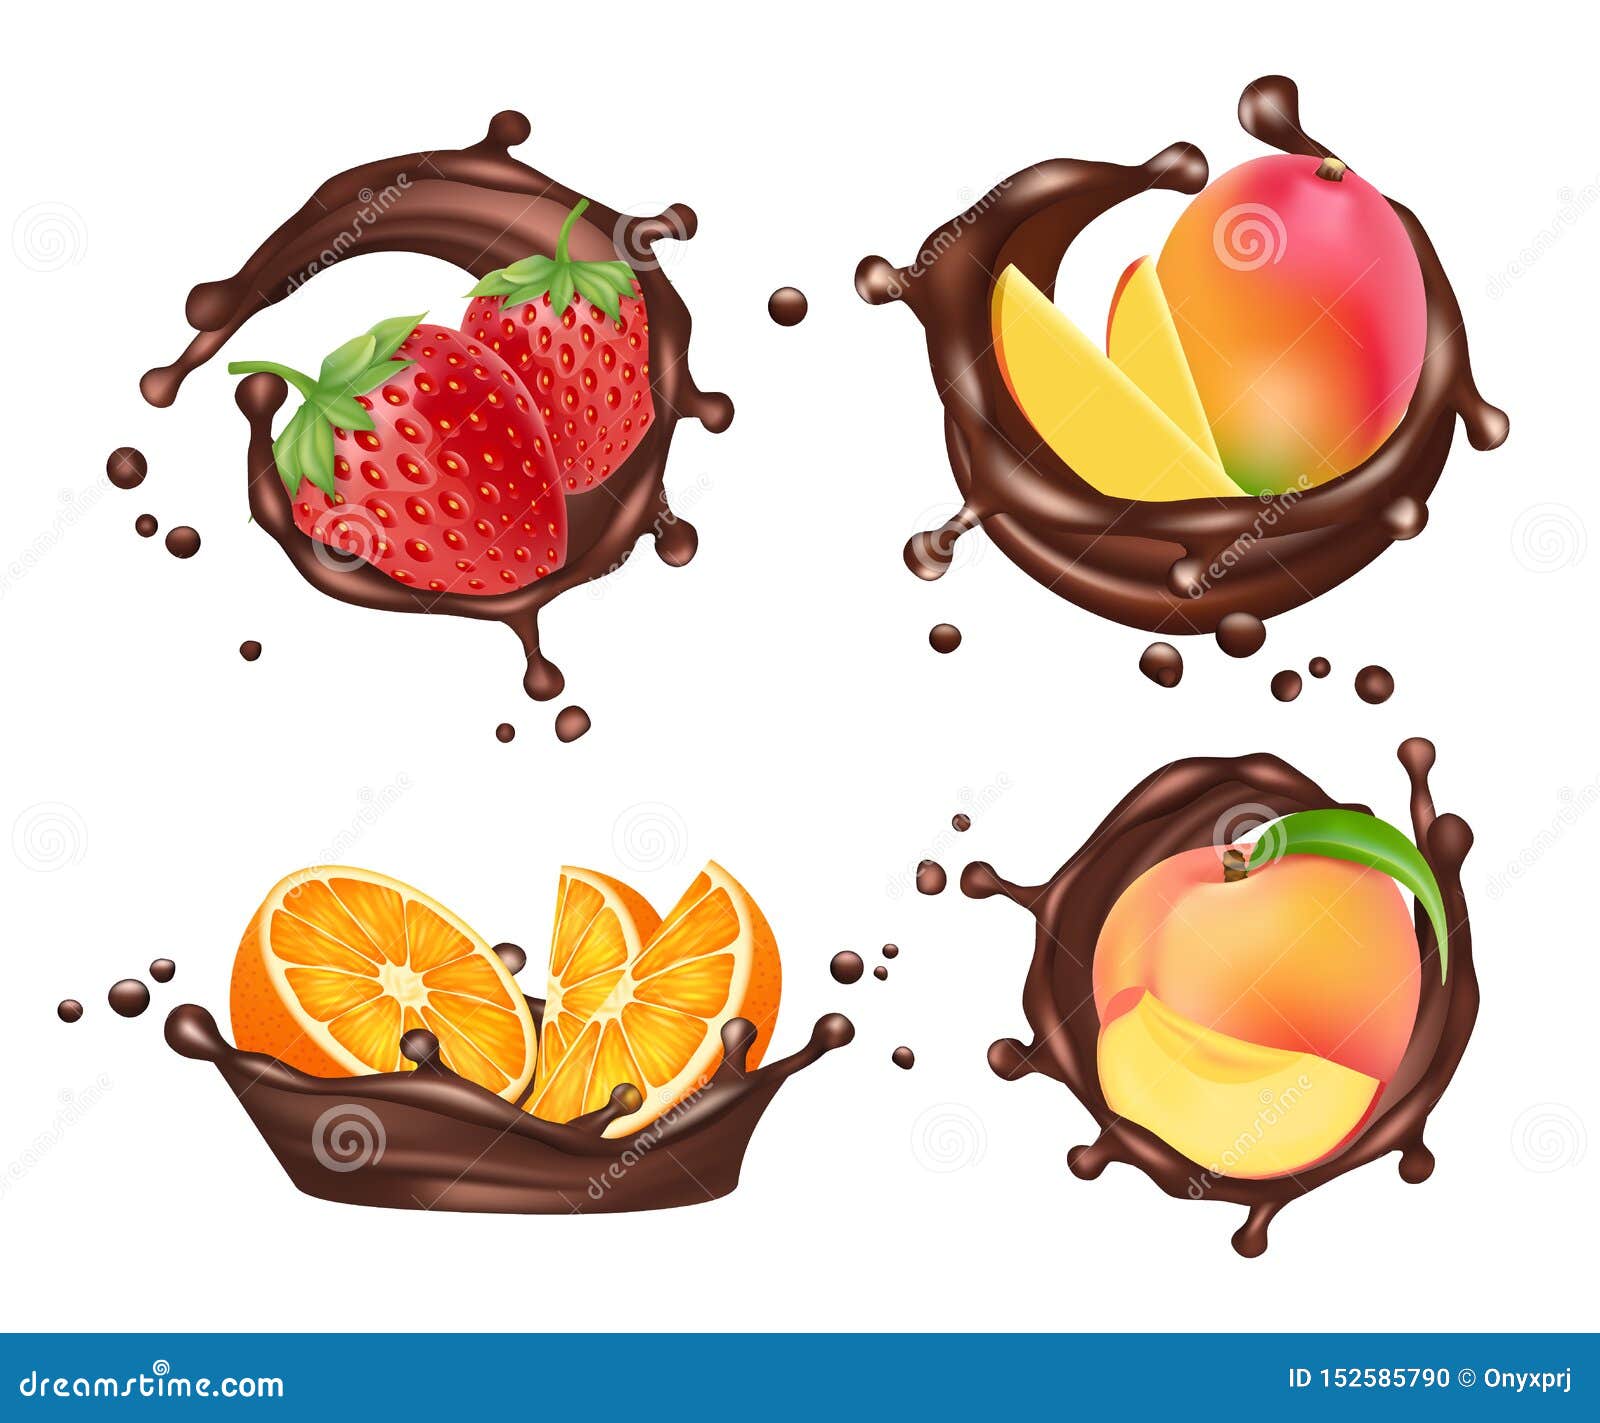 chocolate splashes with fruits and berries.  realistic orange and peach, mango and strawberry with chocolate milk